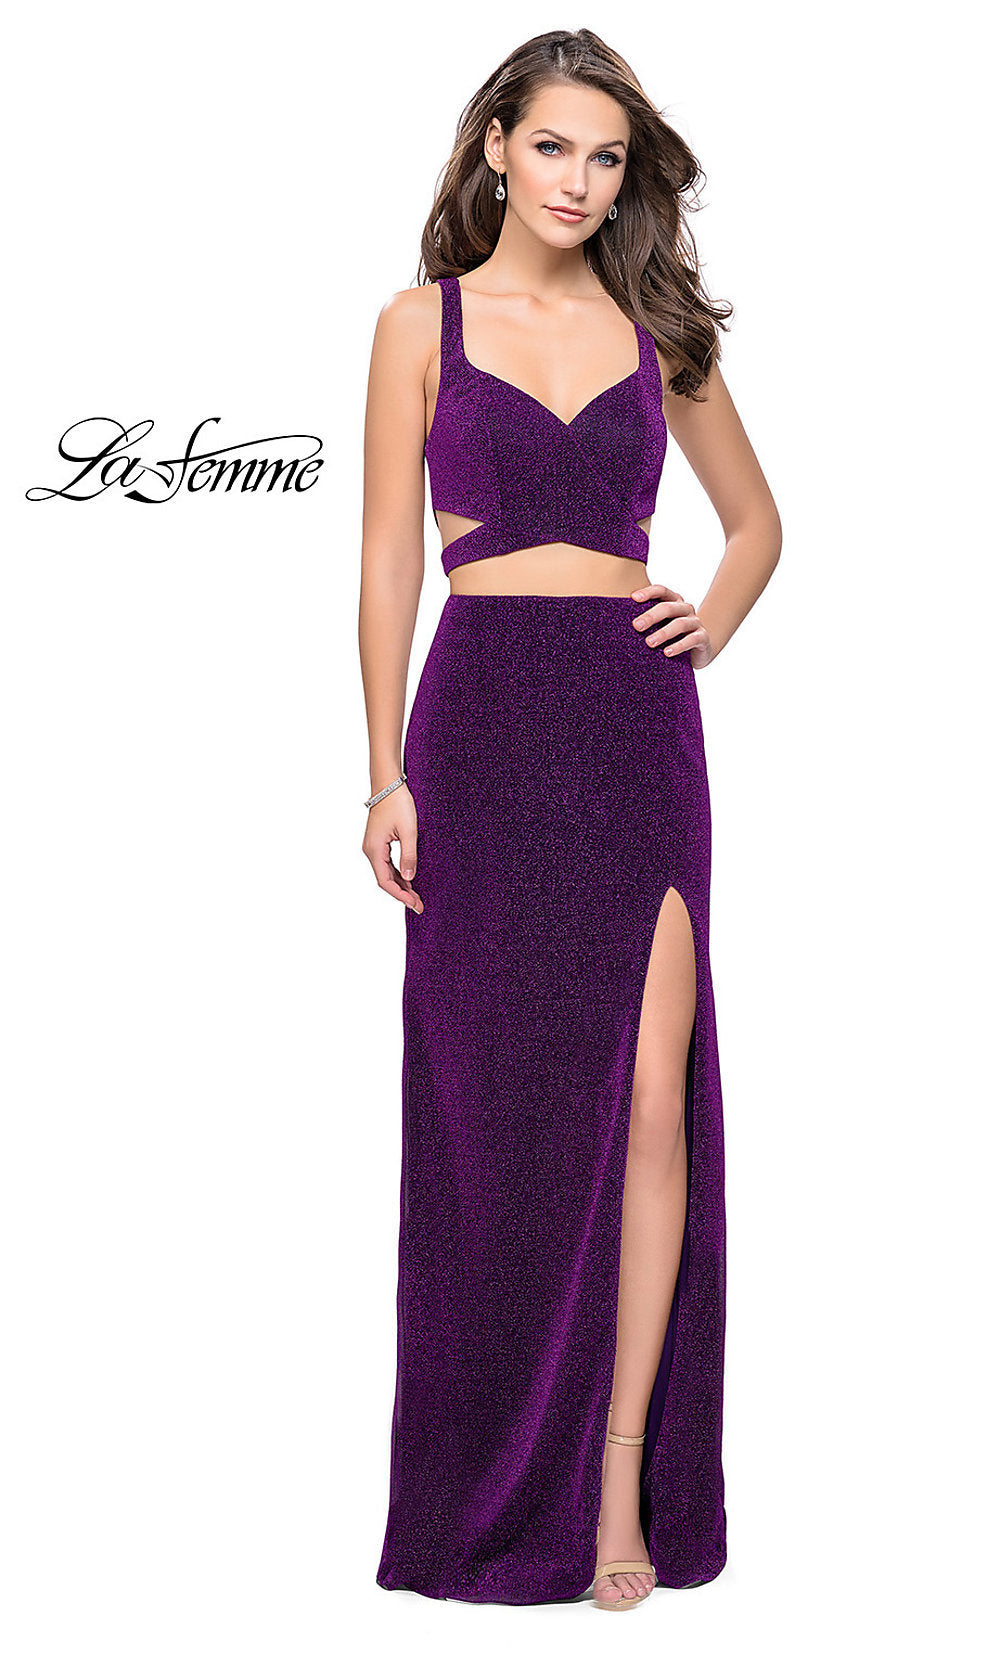 Two-Piece La Femme Prom Dress with Open Back